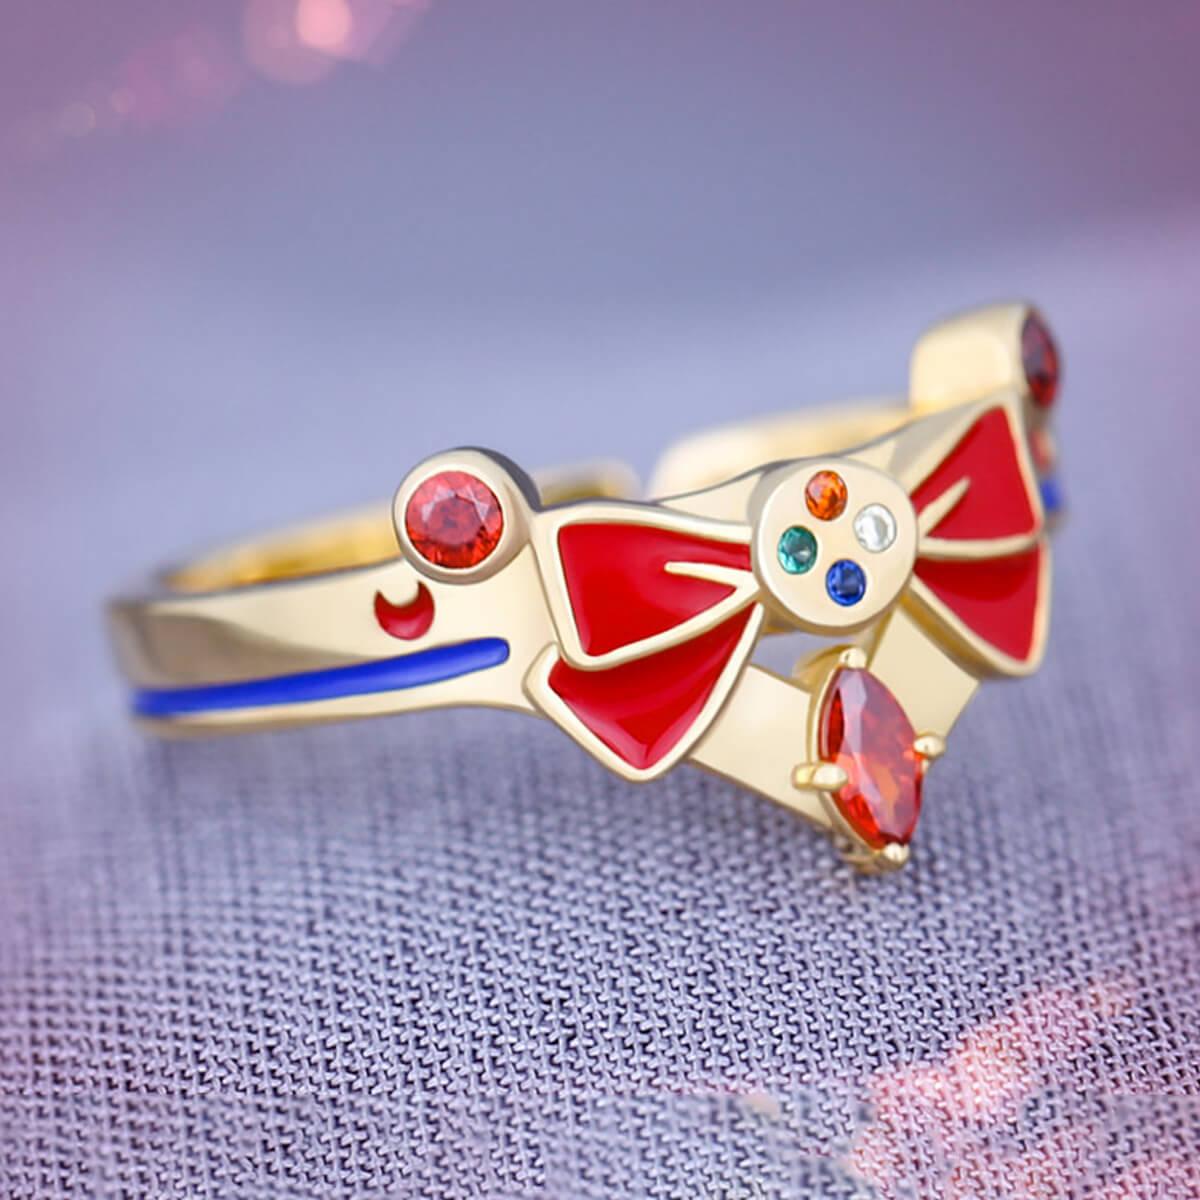 Sailor Moon Aesthetic Ring S925 Silver - Aesthetic Clothes Shop